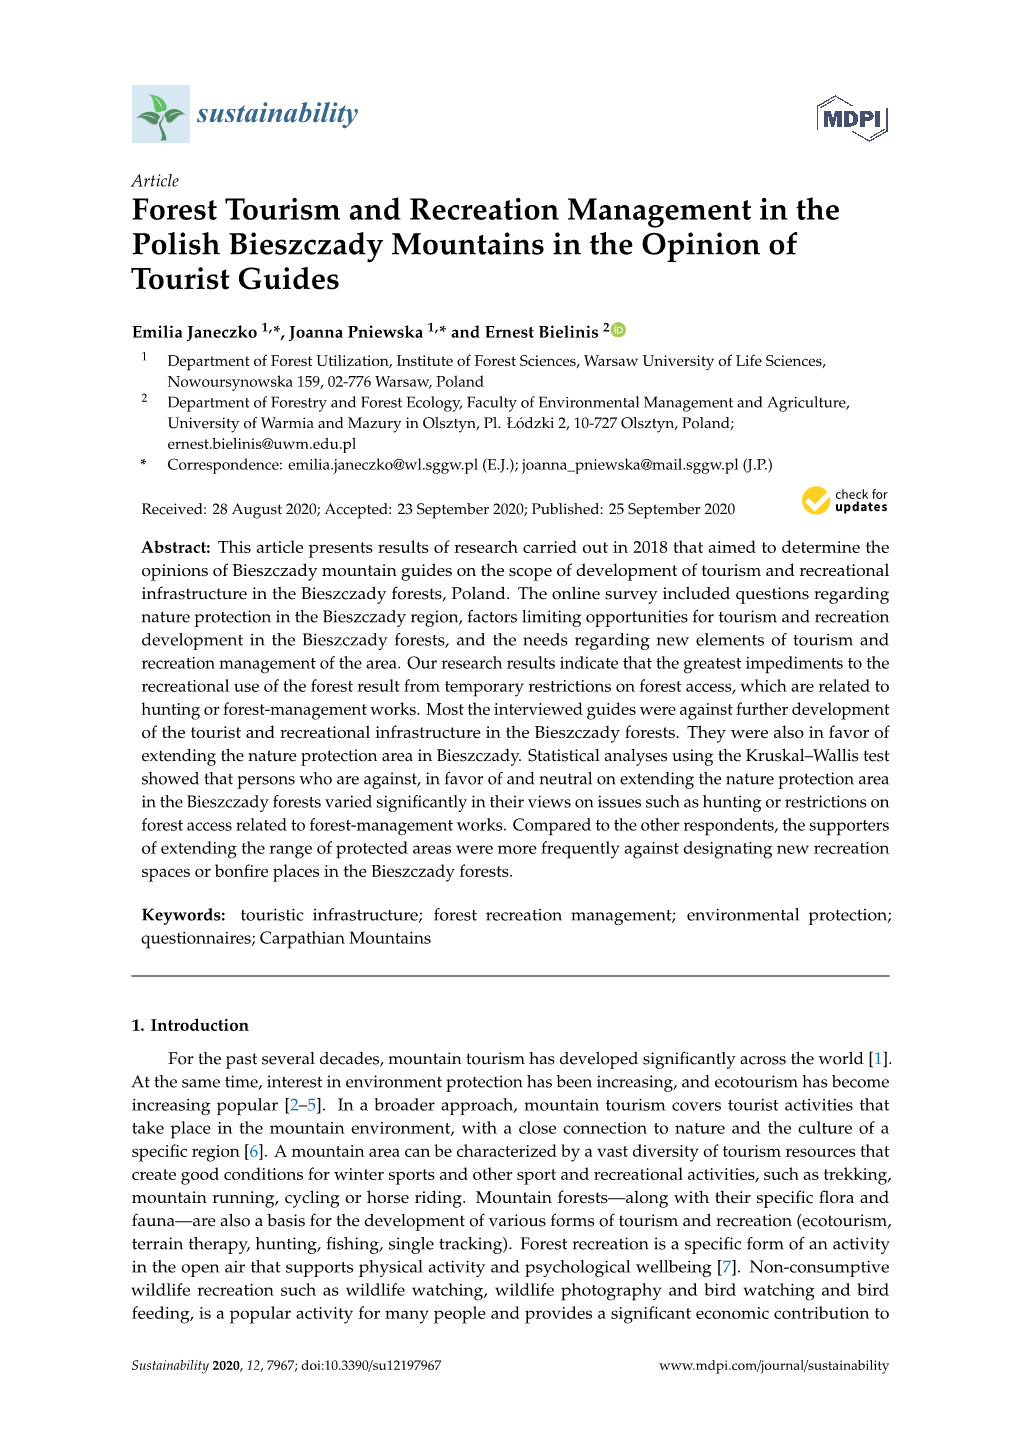 Forest Tourism and Recreation Management in the Polish Bieszczady Mountains in the Opinion of Tourist Guides